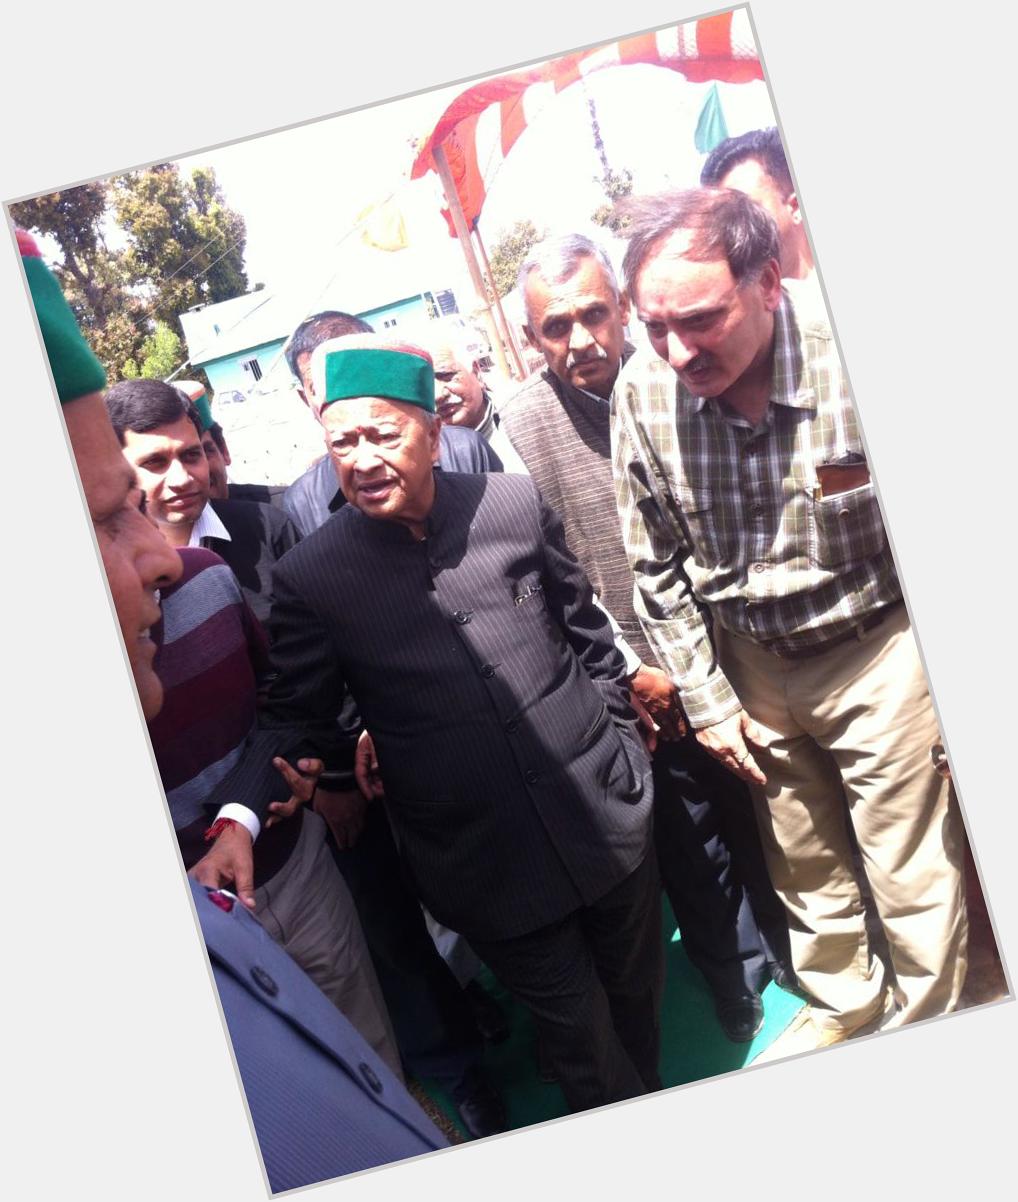 A very happy birthday to most loved raja virbhadra singh ji. May he live long and healthy ... 